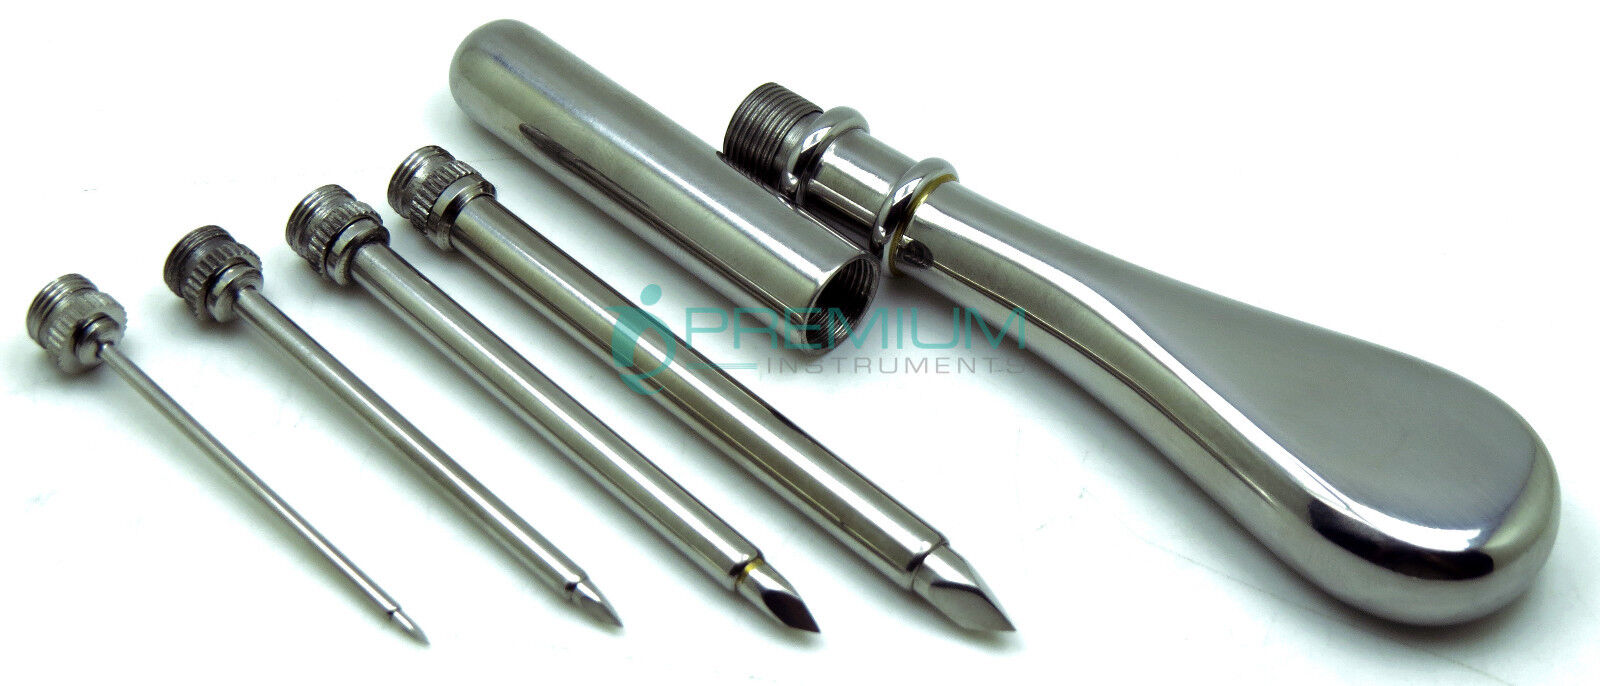 Surgical Nested Trocars #6, #9, #13 & #17 French Stainless Steel Set of 4